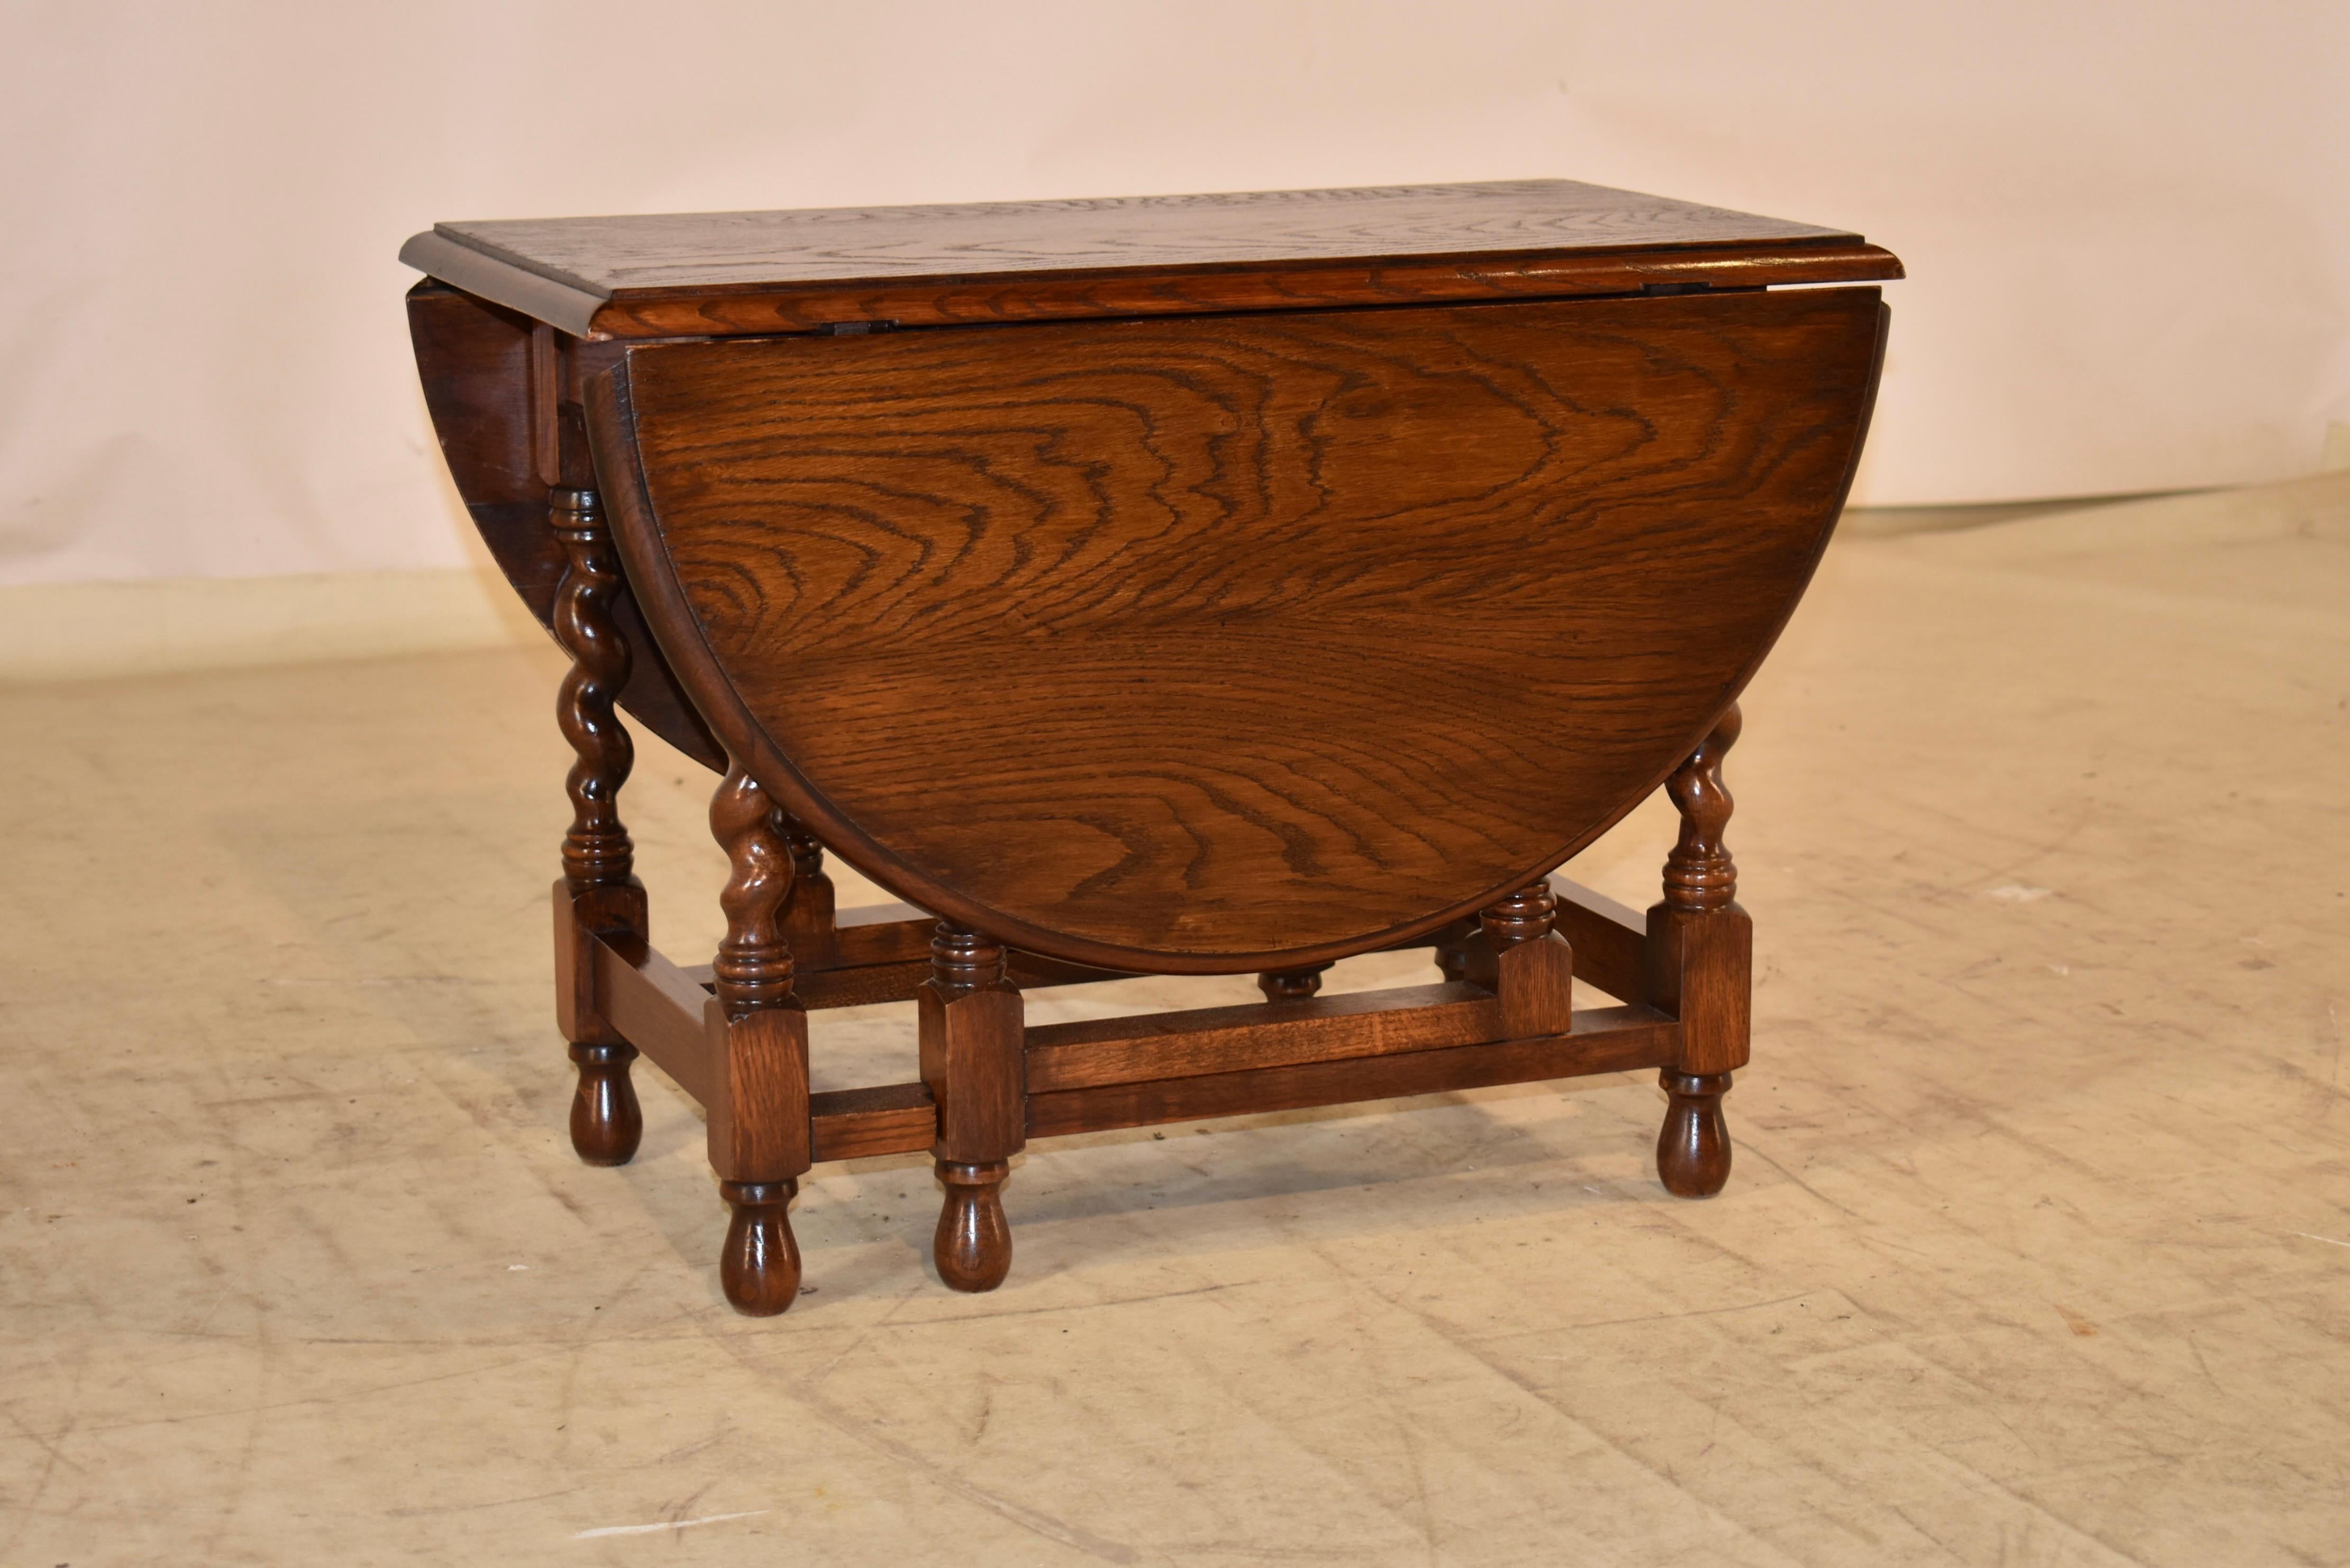 Edwardian oak coffee or cocktail table with two drop leaves.  The table when open measures 35.13 long x 24 wide x 17.75 high.  The top has a lovely graining and a beveled edge, supported on hand turned barley twist legs.  The legs are joined by